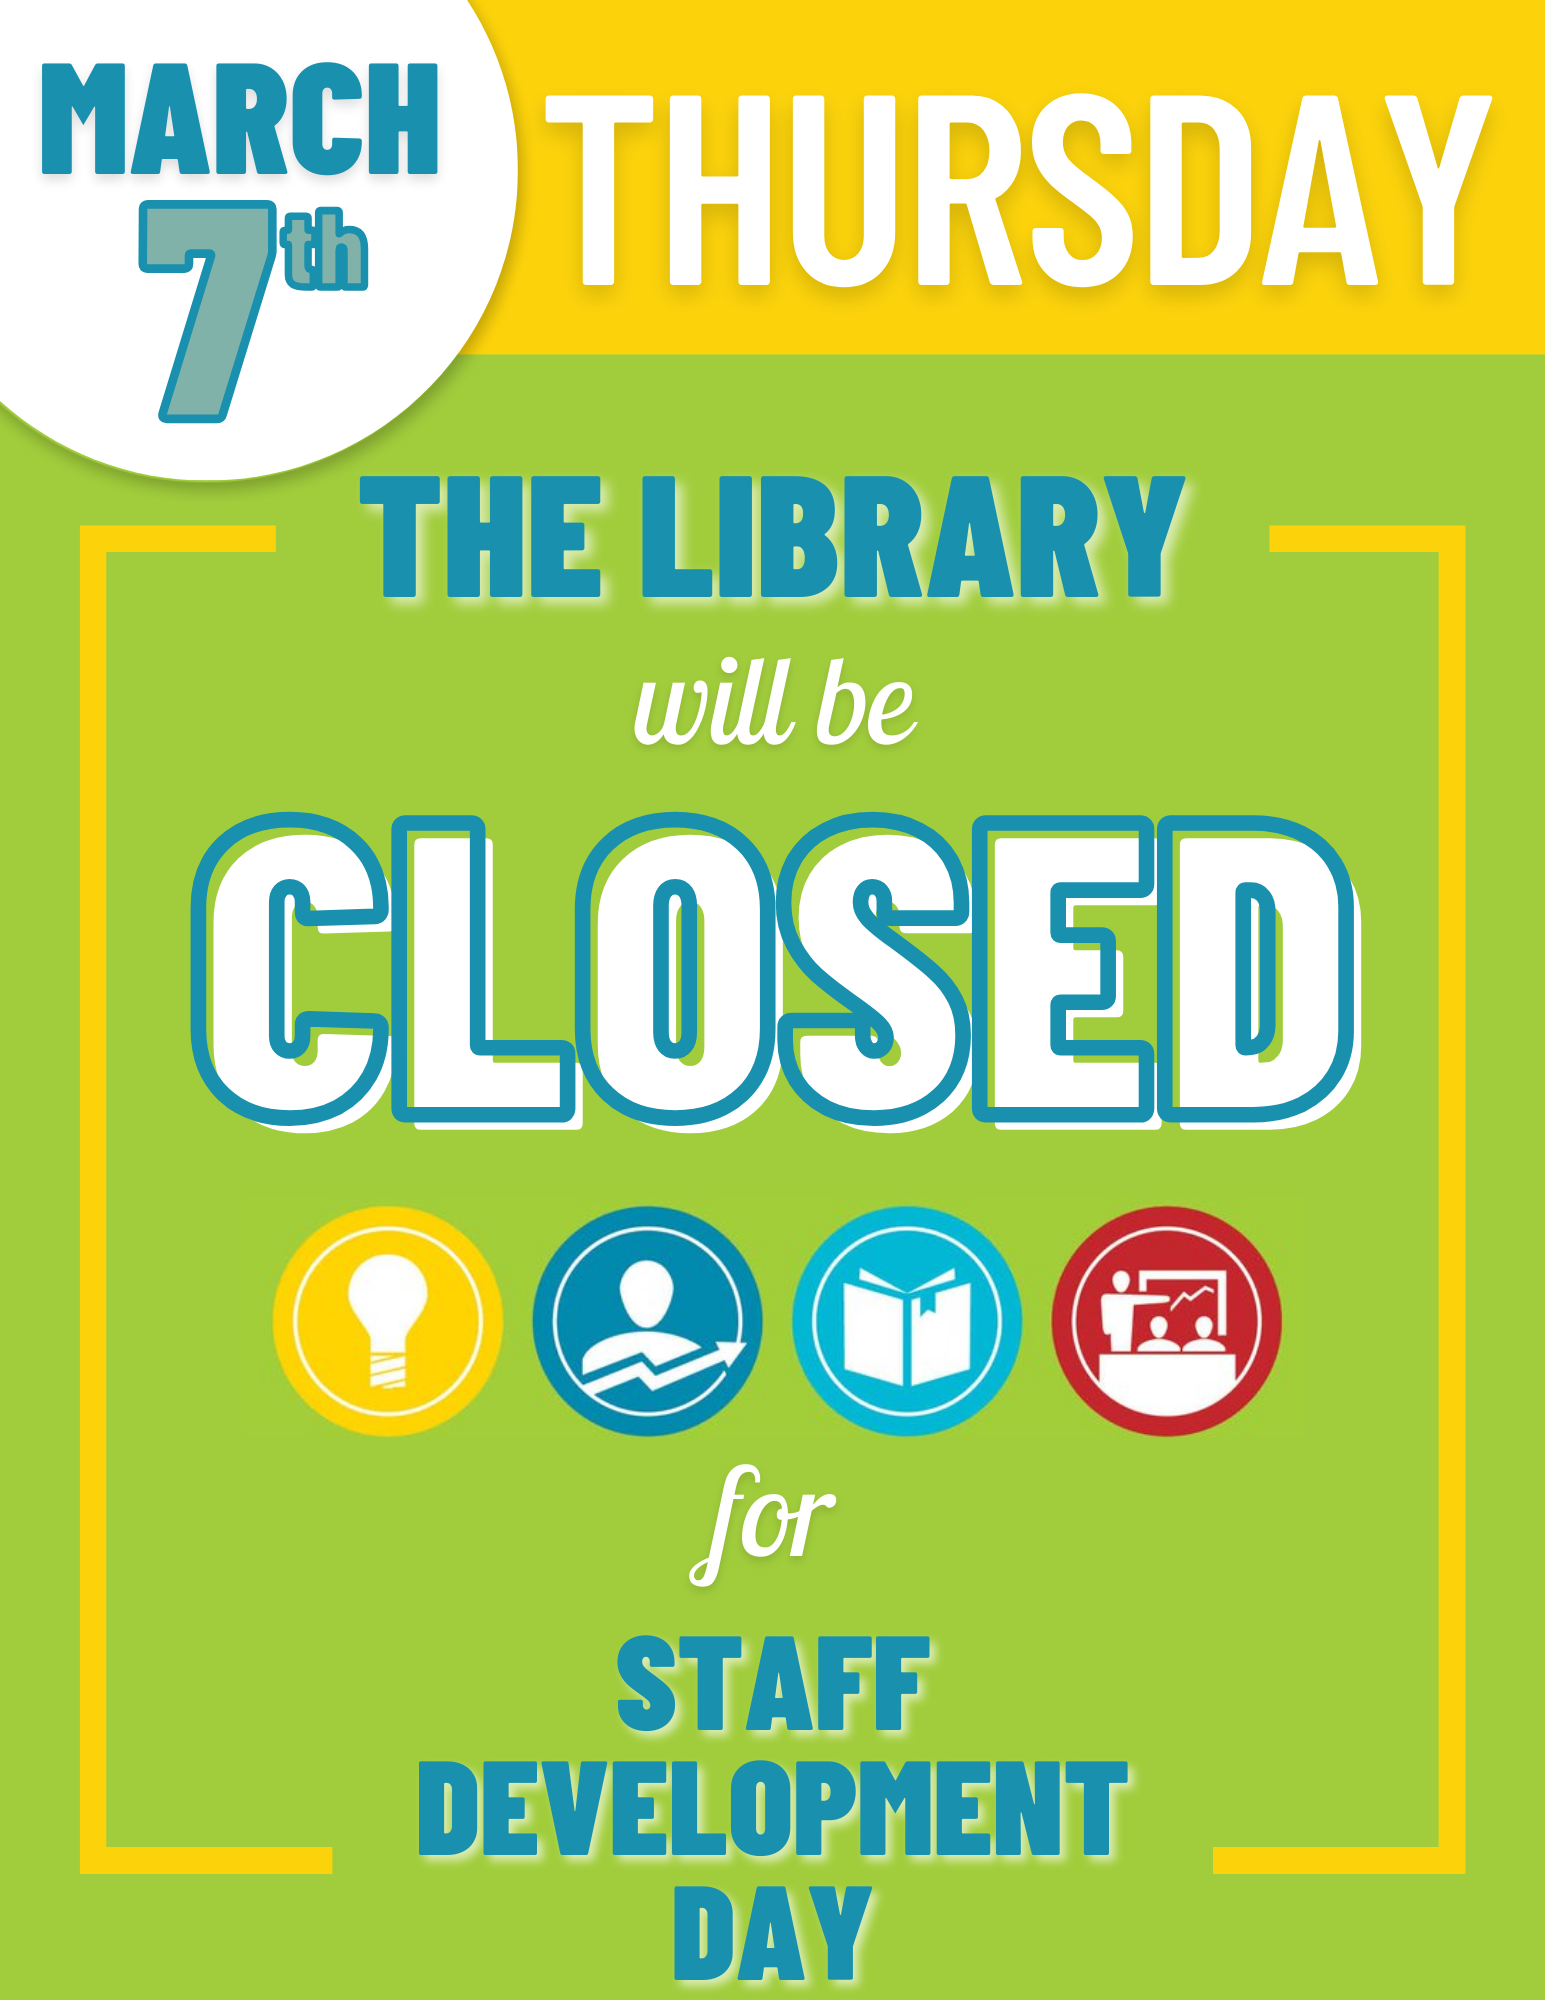 The Library will be Closed March 7th for Staff Development Day.